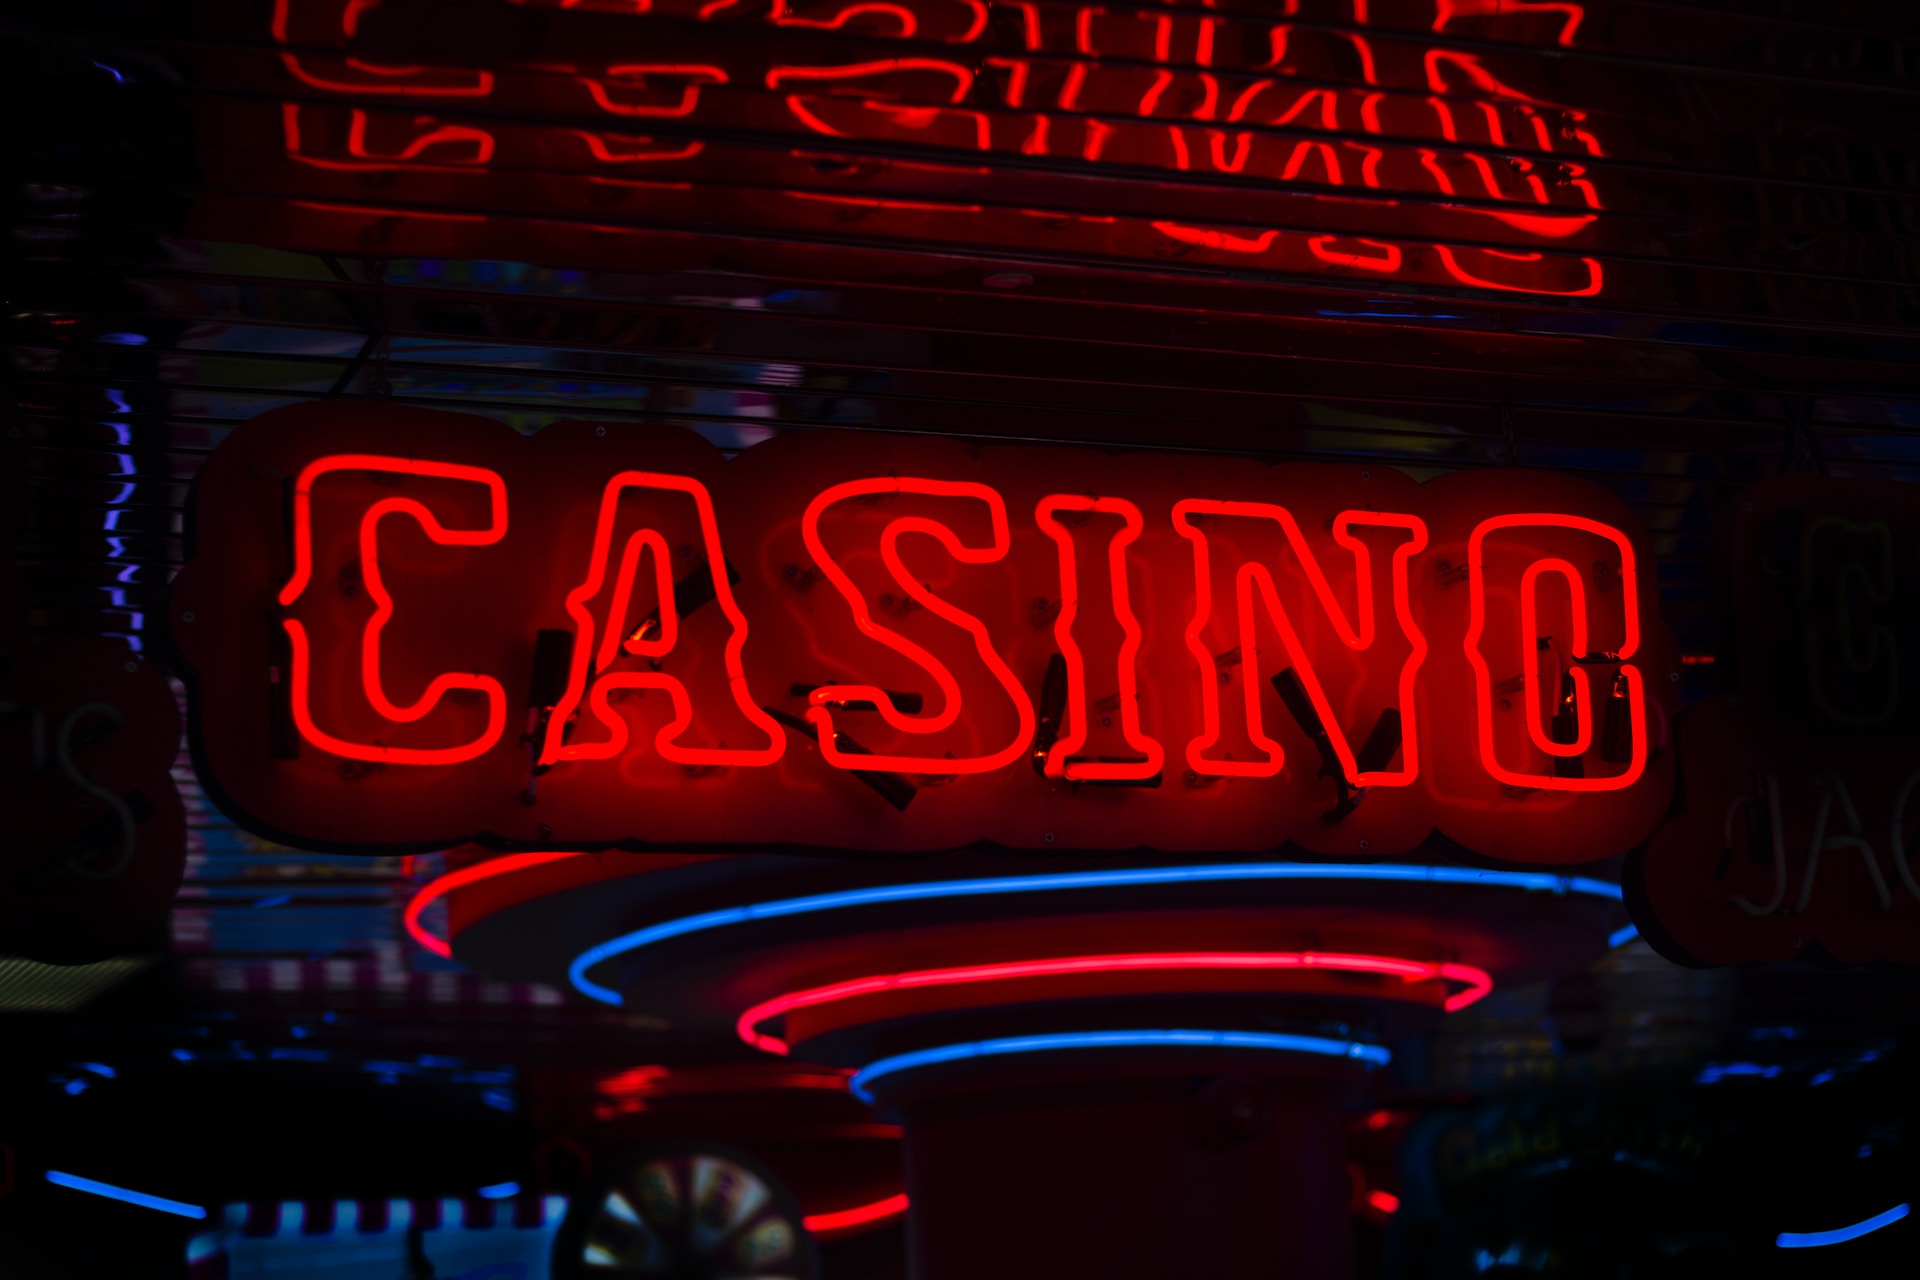 A large ‘casino’ sign in neon red lights